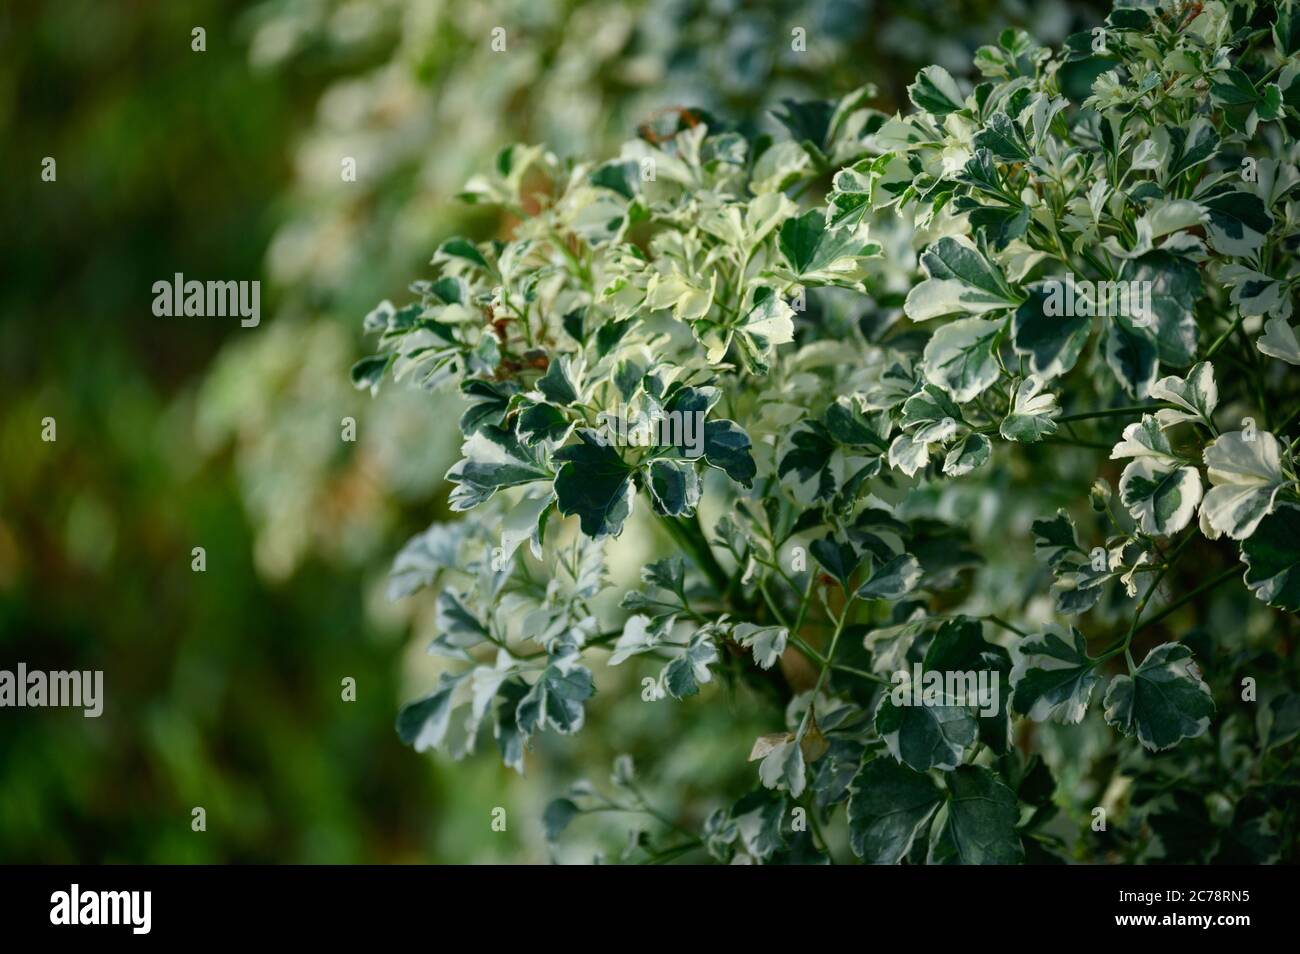 Polyscias Guilfoylei of Perennial plant with green leaf of spotted leaves in garden Stock Photo